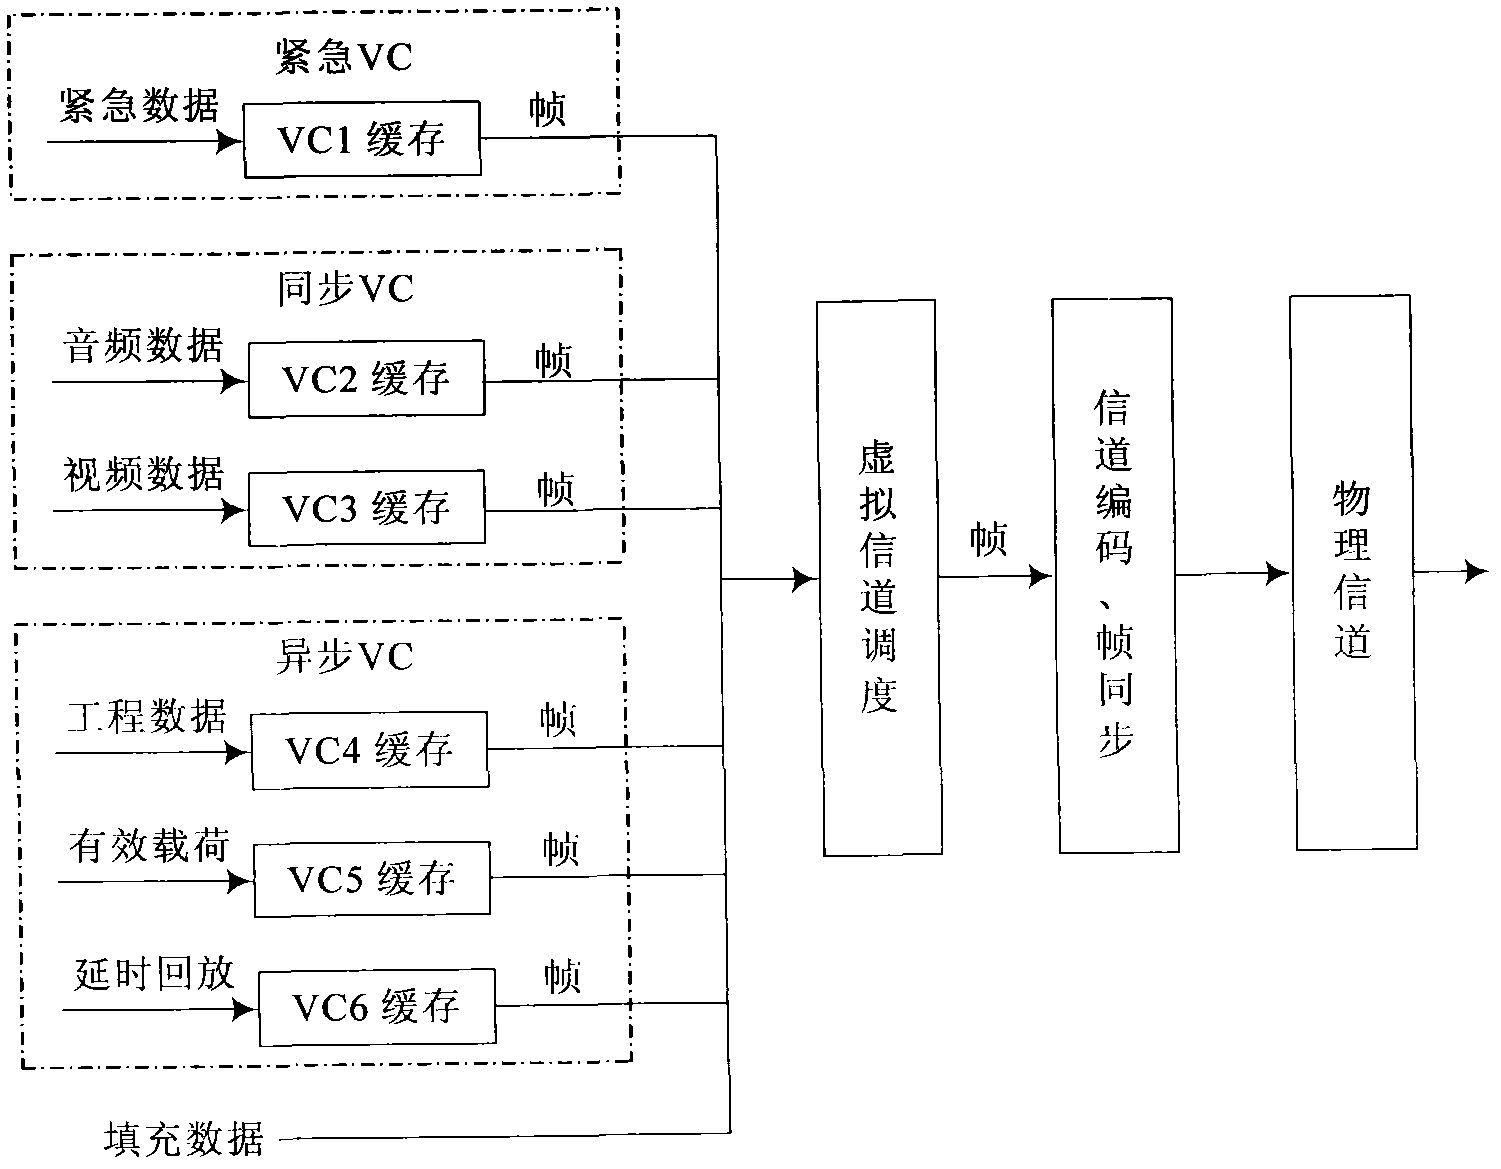 Virtual channel multiplexing scheduling algorithm based on satellite network